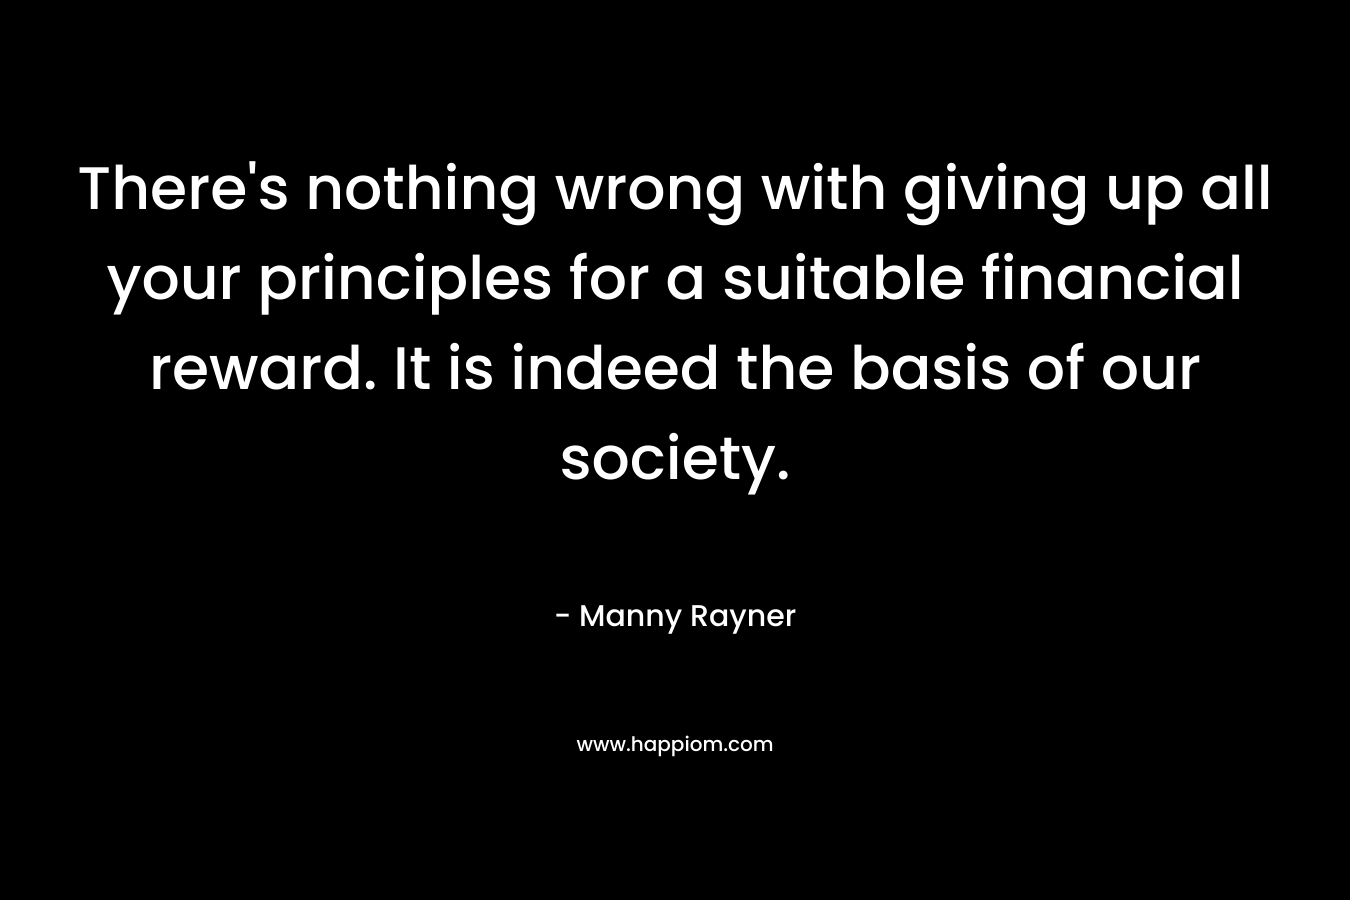 There’s nothing wrong with giving up all your principles for a suitable financial reward. It is indeed the basis of our society. – Manny Rayner